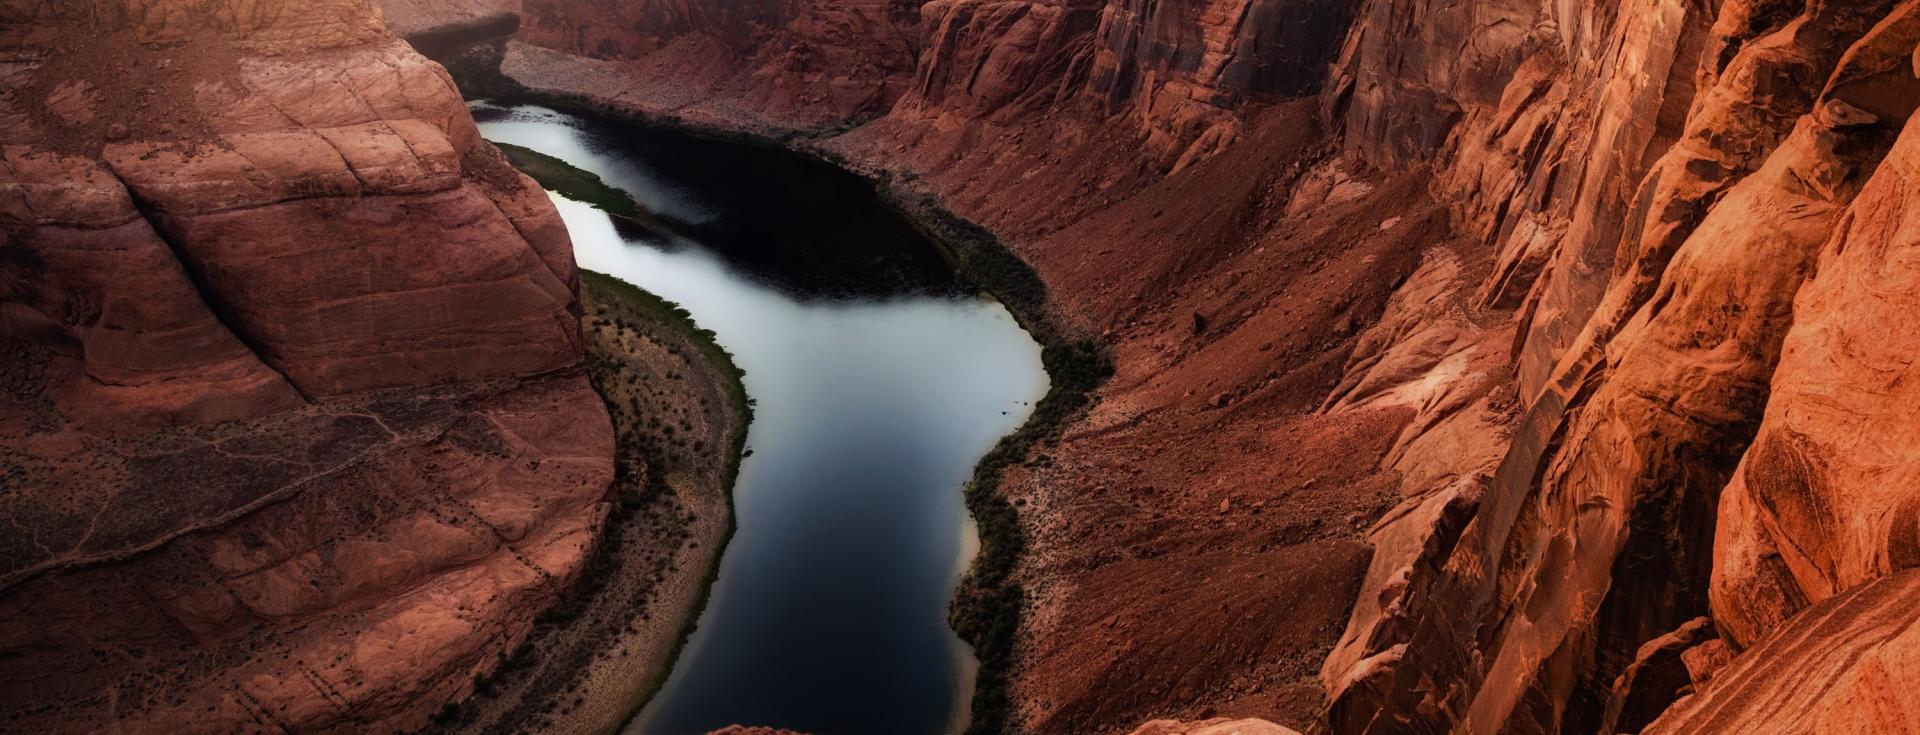 The Colorado River is a major source of water for the western U.S.